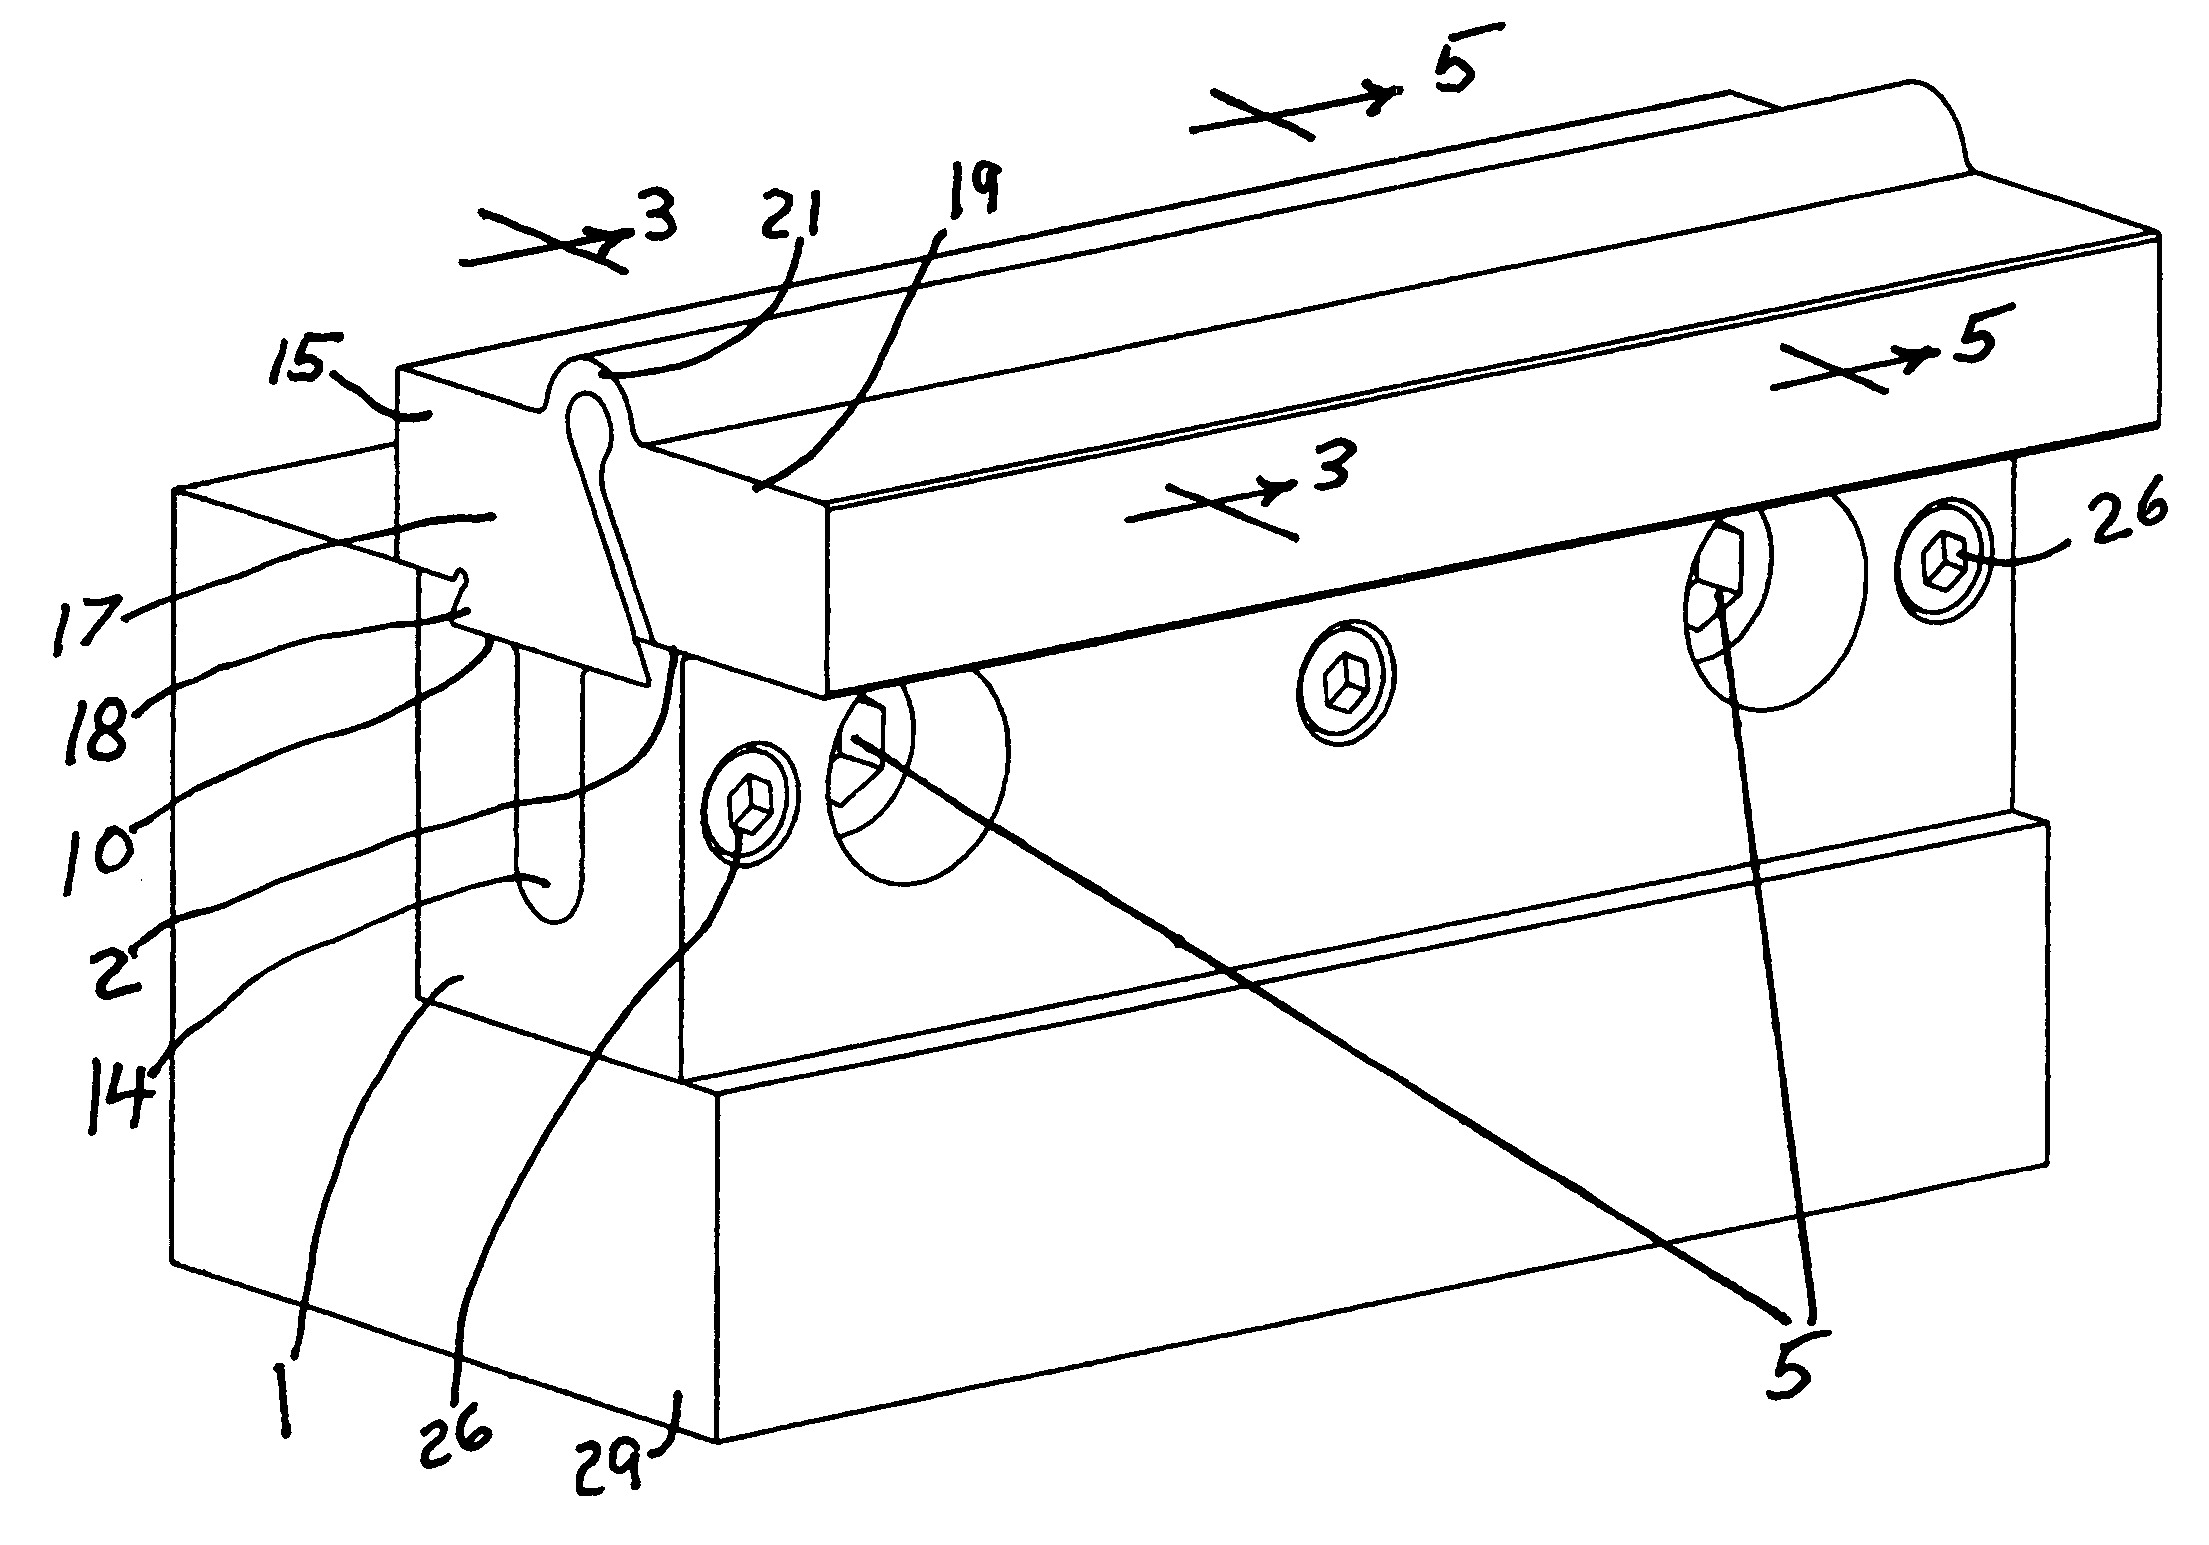 Segmentable resilient vise jaw